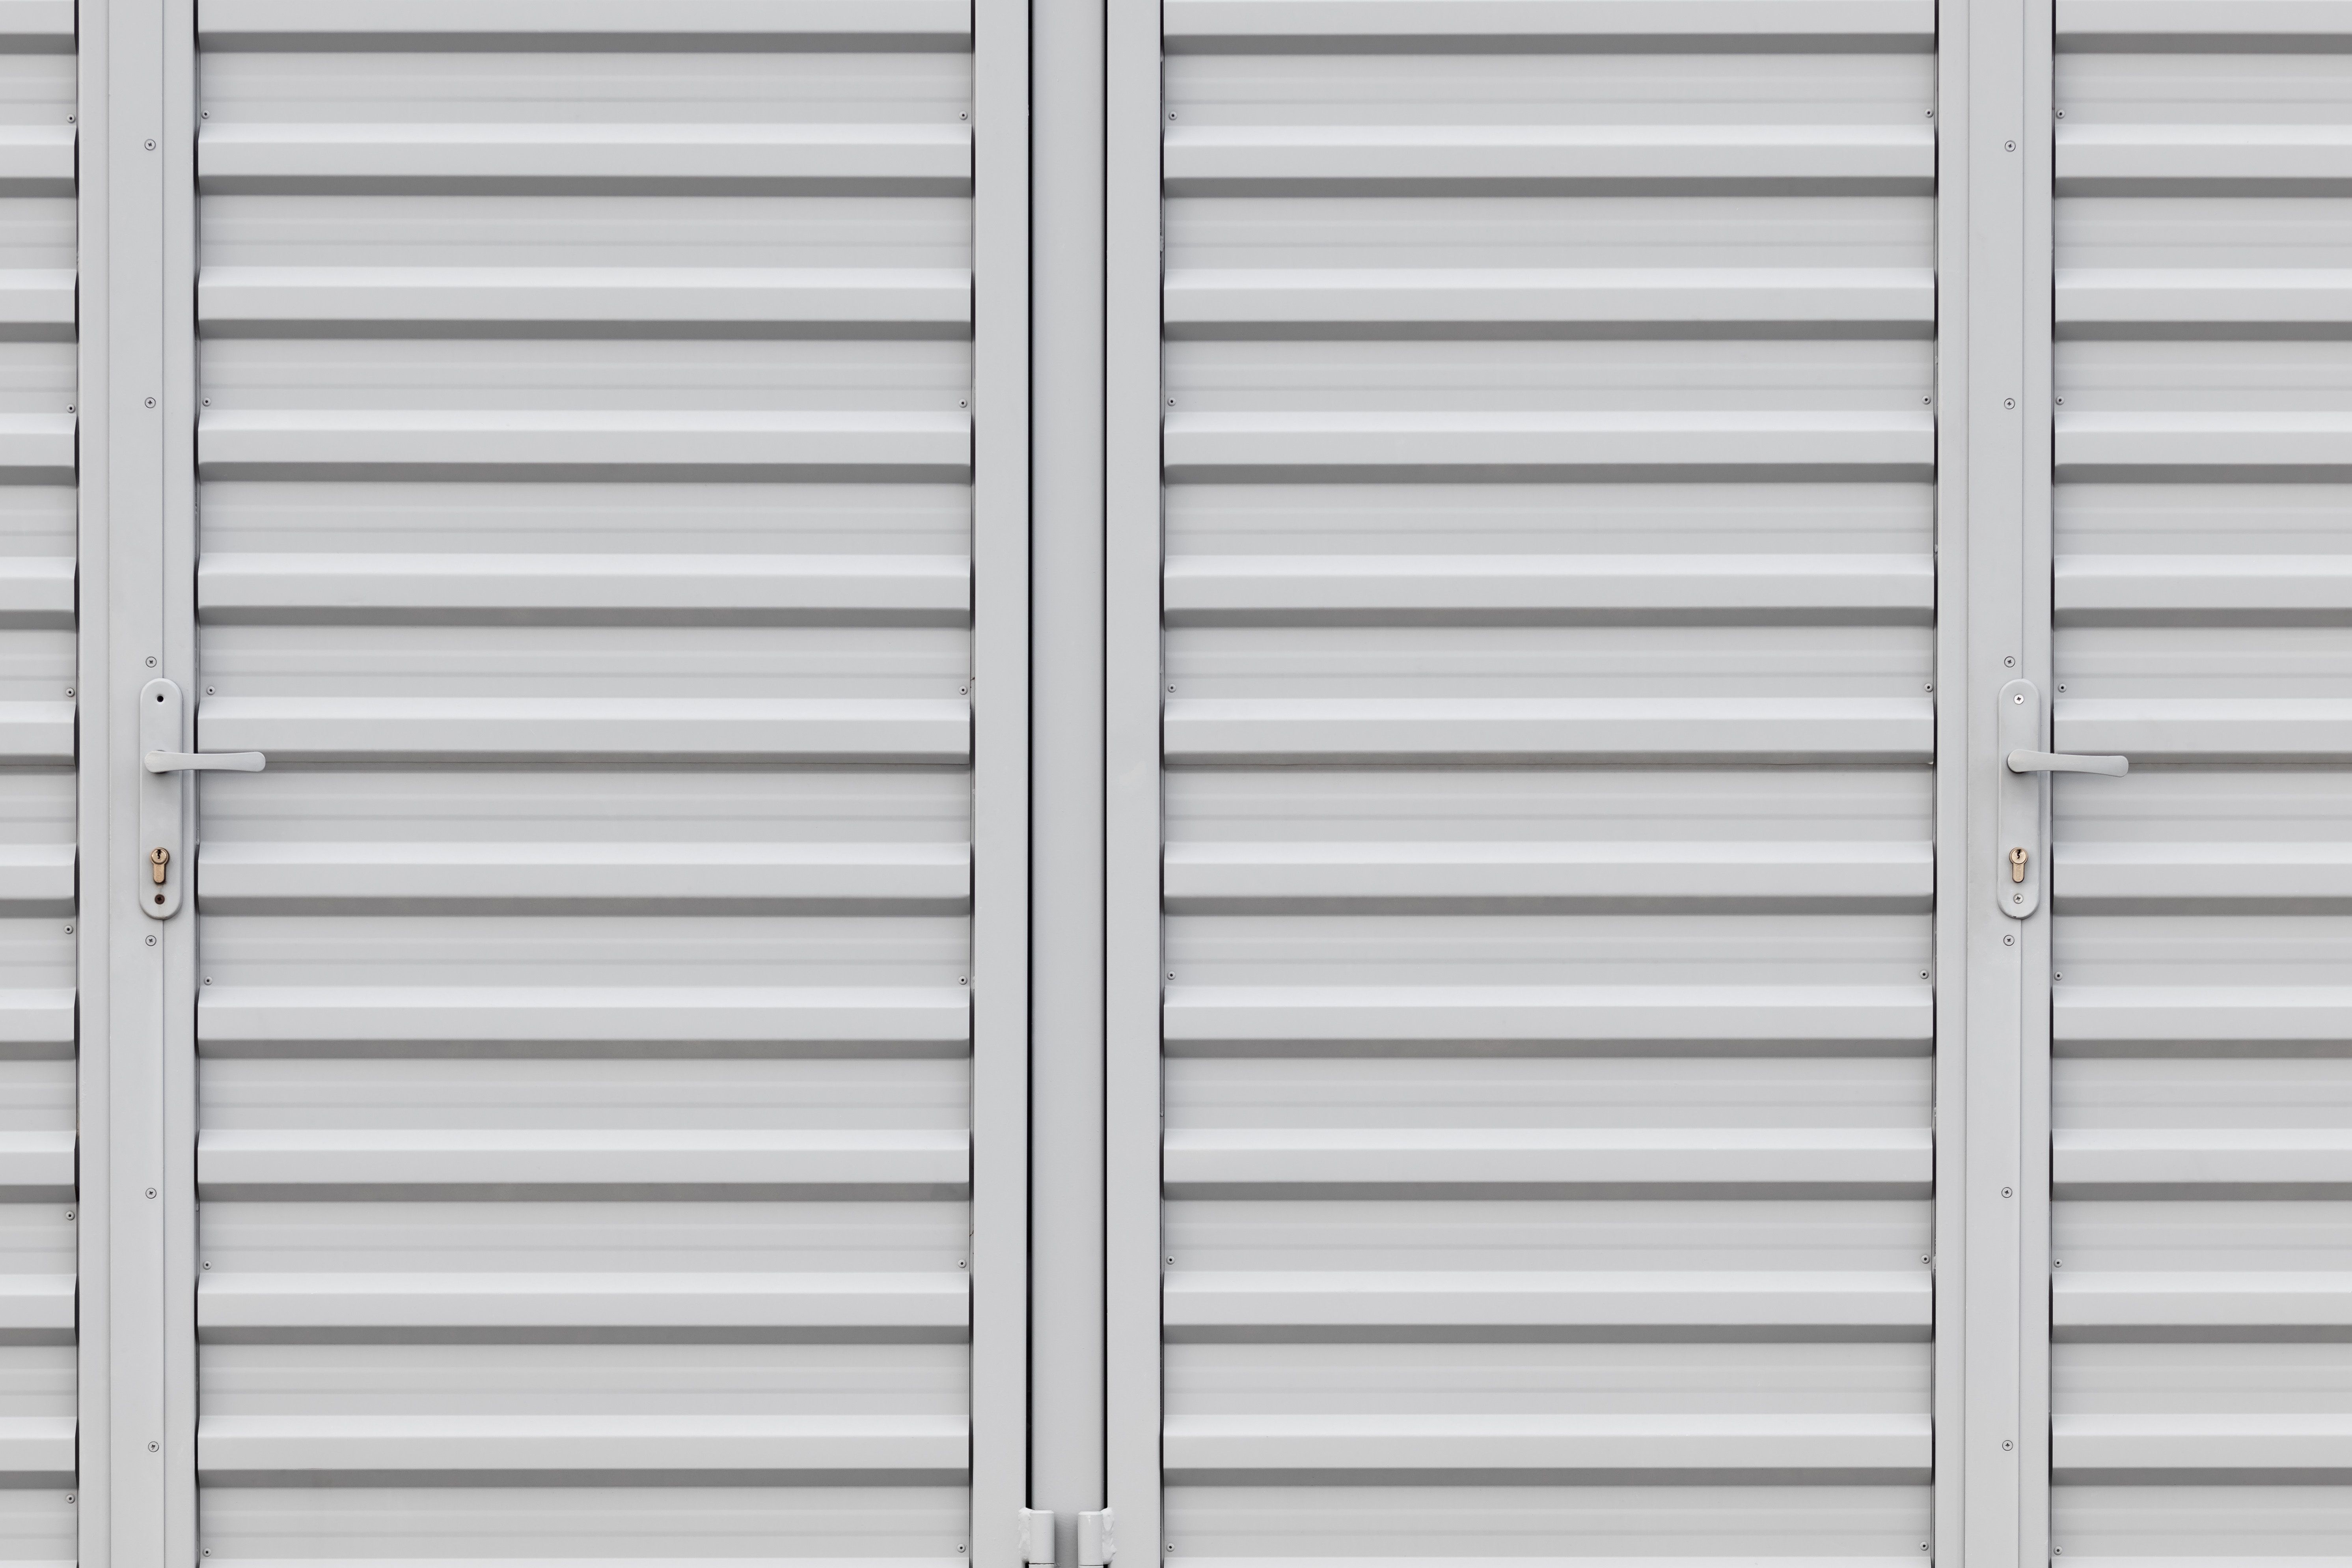 The doors of a white storage unit.